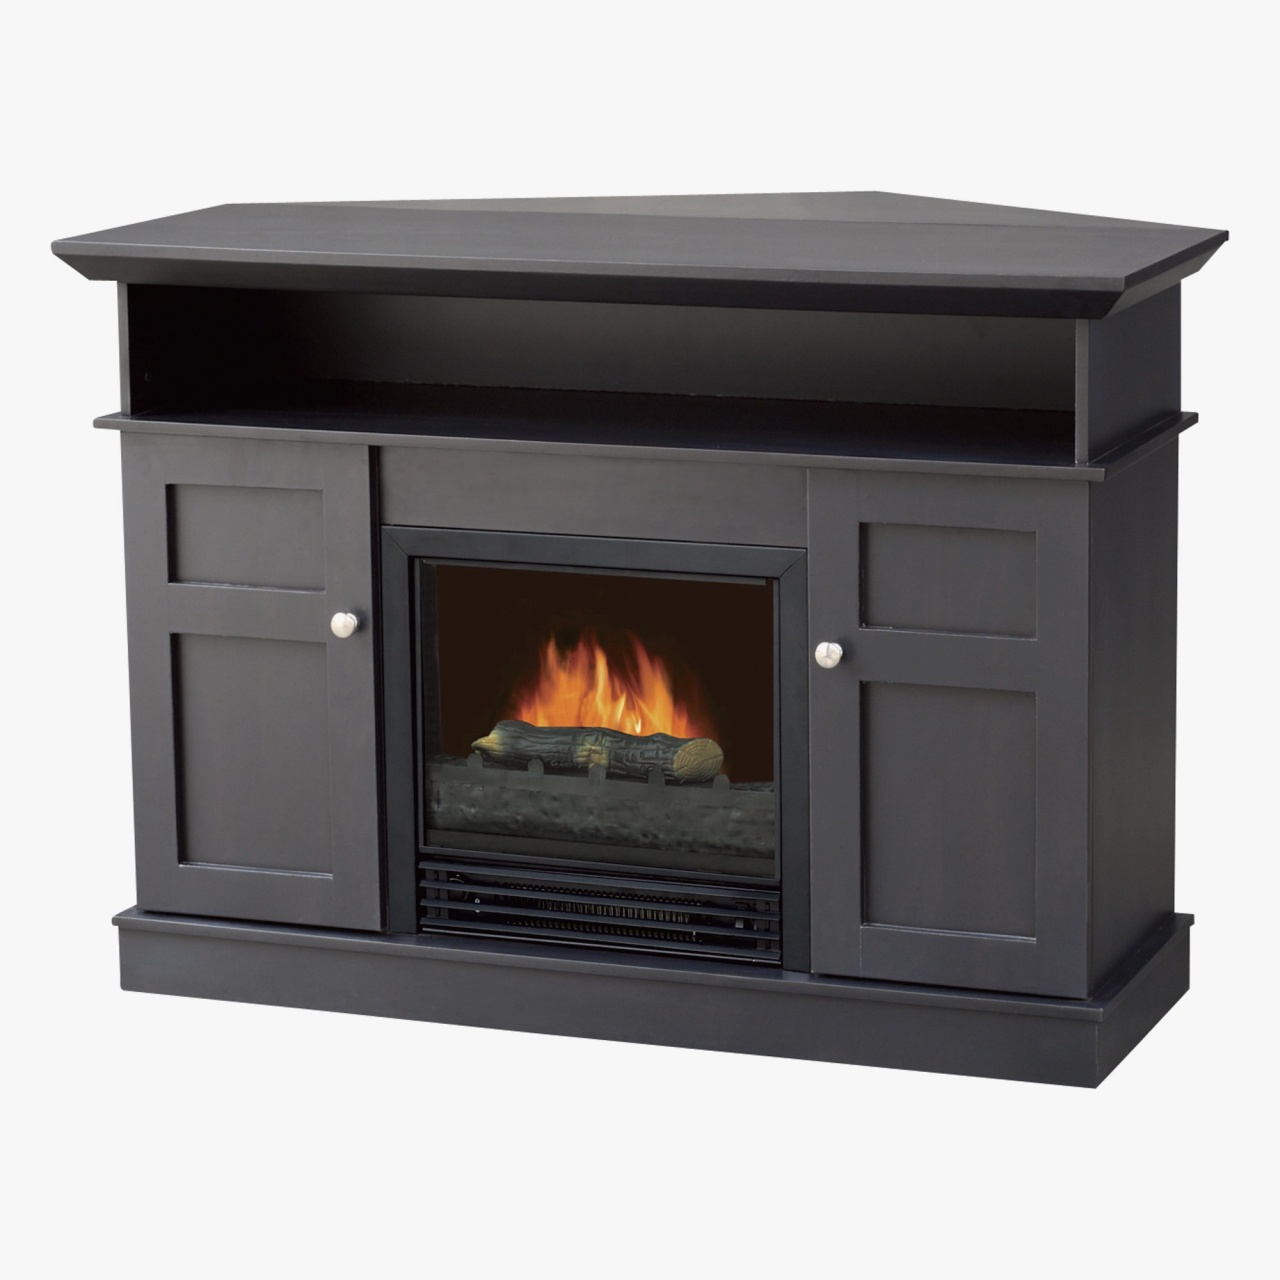 big lots clearance electric fireplace fireplace tv stand big lots neobiota2016 from big lots clearance electric fireplace